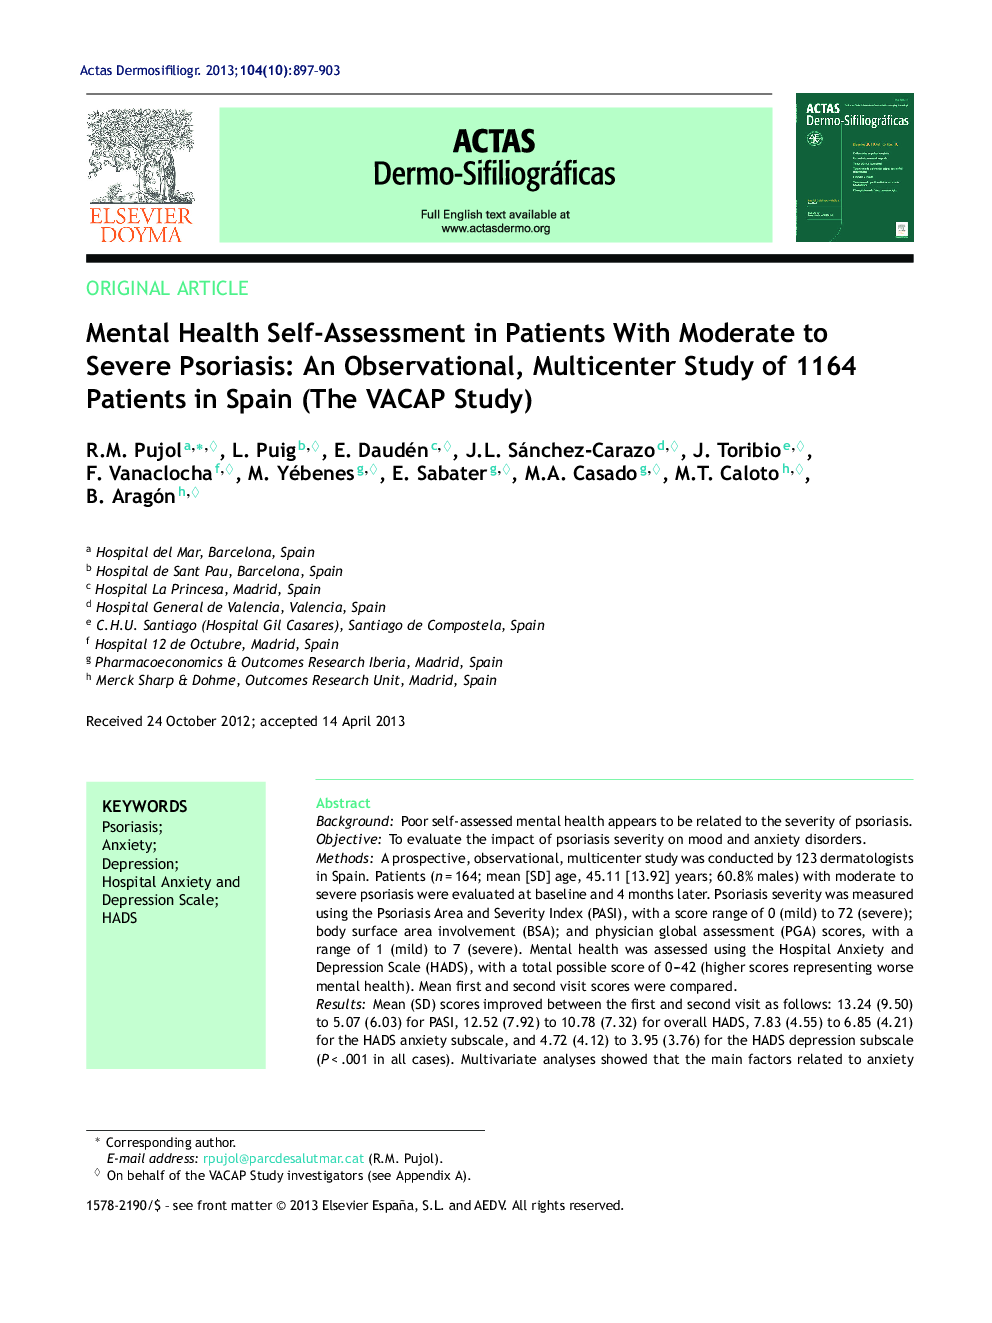 Mental Health Self-Assessment in Patients With Moderate to Severe Psoriasis: An Observational, Multicenter Study of 1164 Patients in Spain (The VACAP Study)